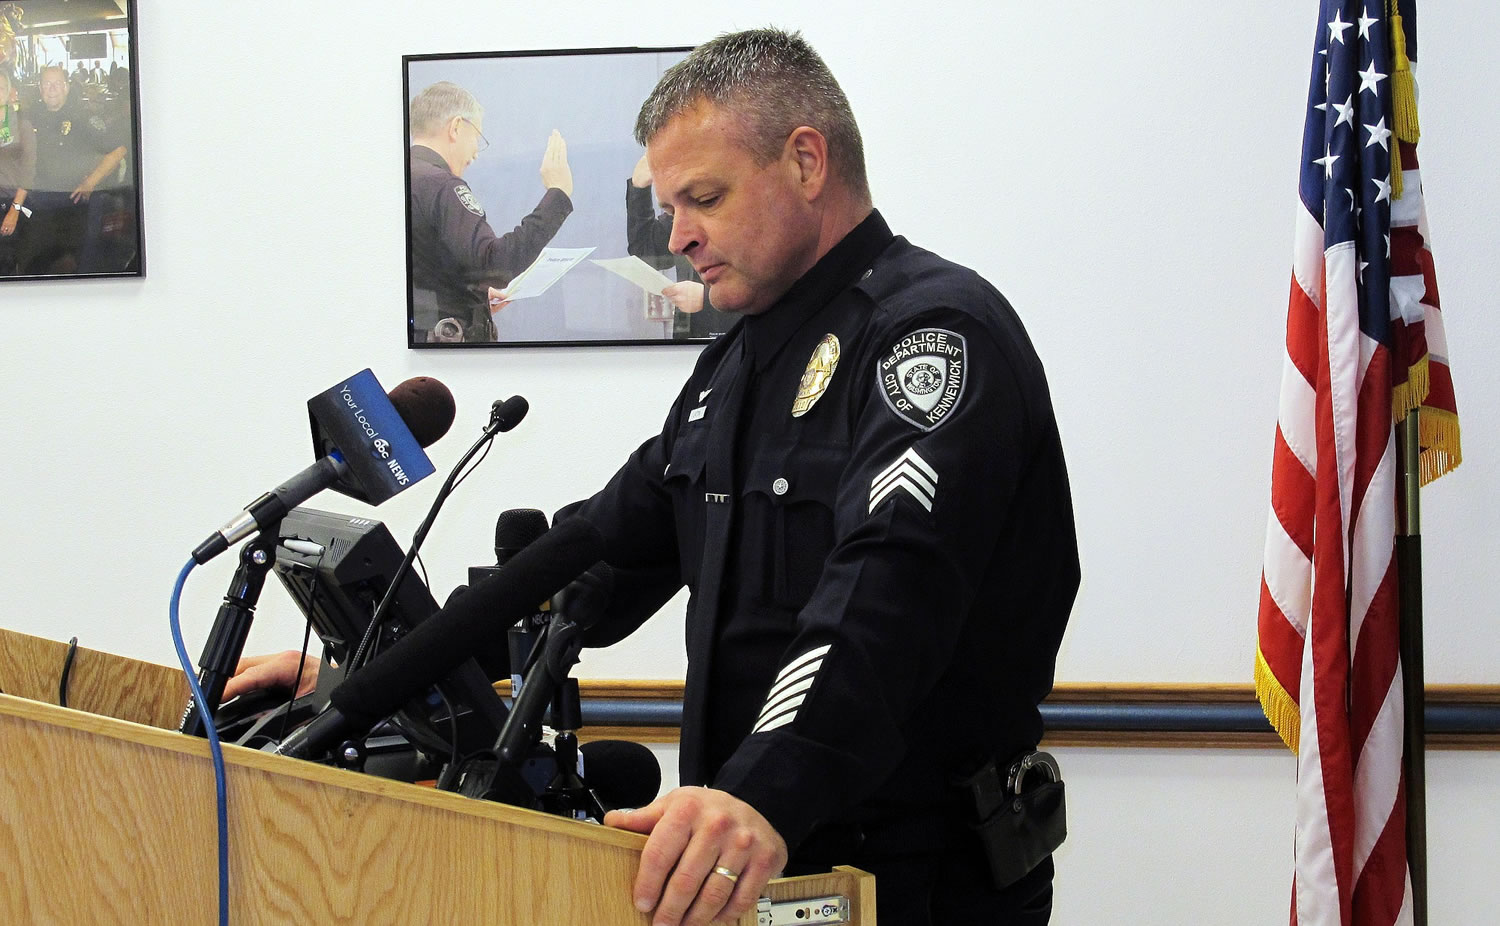 Kennewick Police Sgt. Ken Lattin talks to reporters, Wednesday about the investigation of the fatal police shooting of Antonio Zambrano-Montes, who was unarmed, in nearby Pasco on Feb. 10.